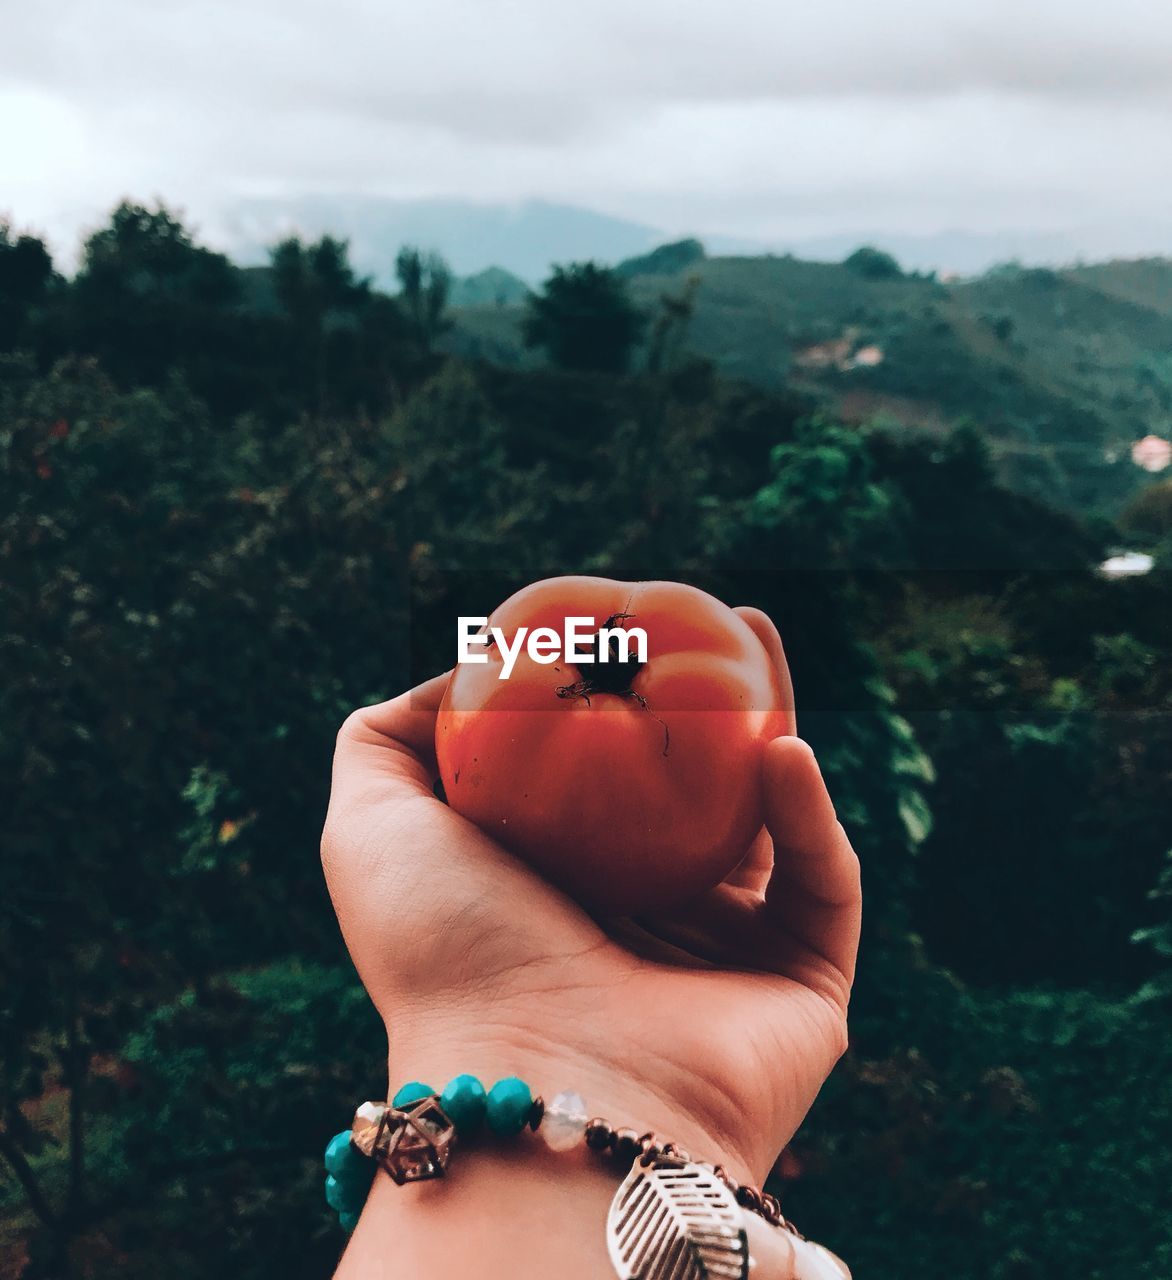 Cropped hand holding tomato against landscape